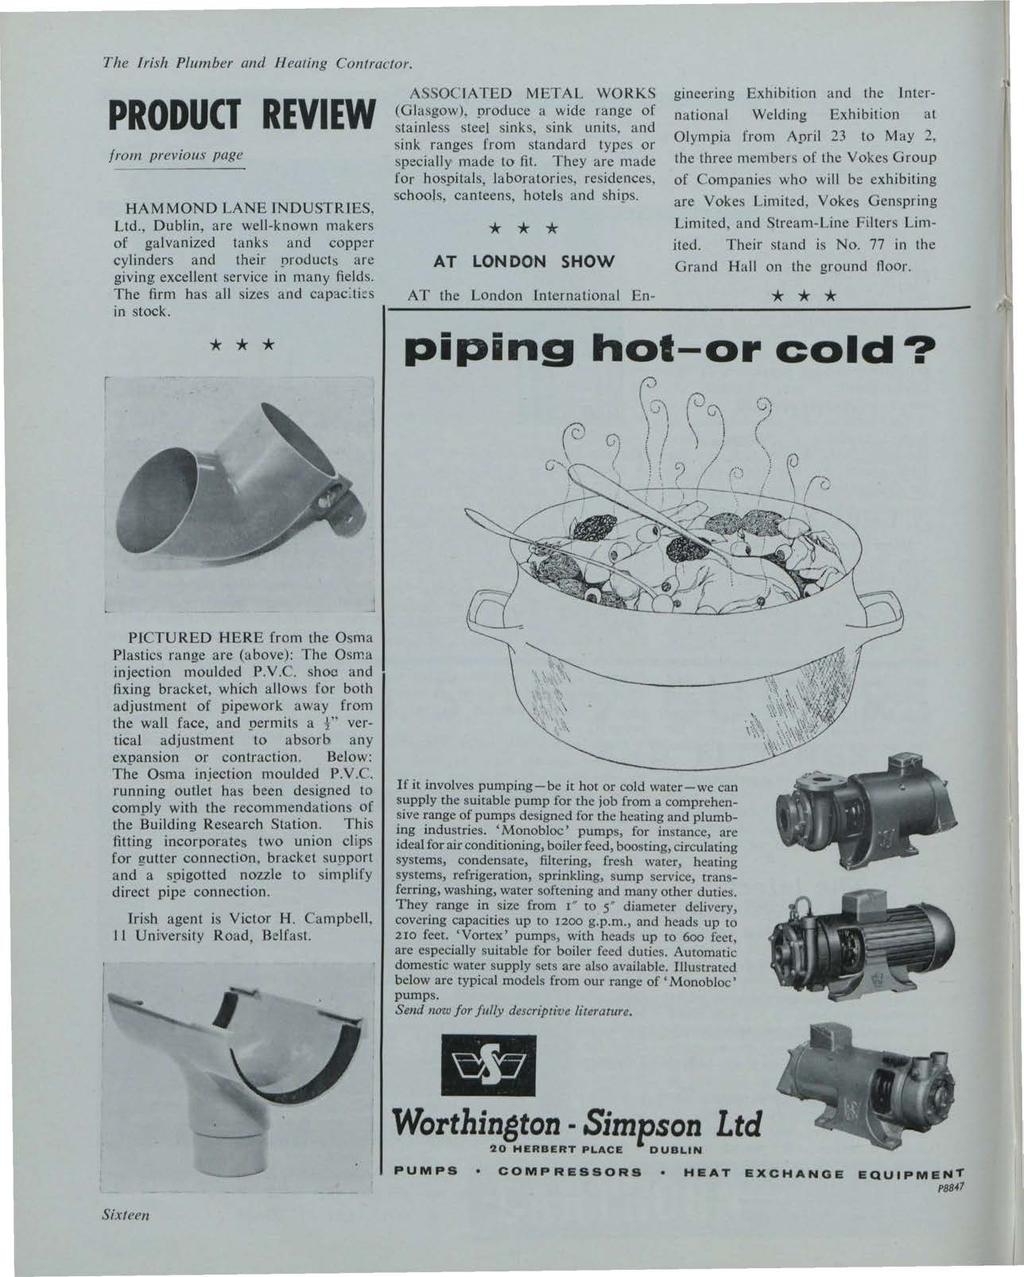 Building Services News, Vol. 2, Iss. 12 [1963], Art. 1 The Irish Plumber and Heating Contractor. PRODUCT REVIEW from previous page HAMMOND LANE INDUSTRIES, Ltd.